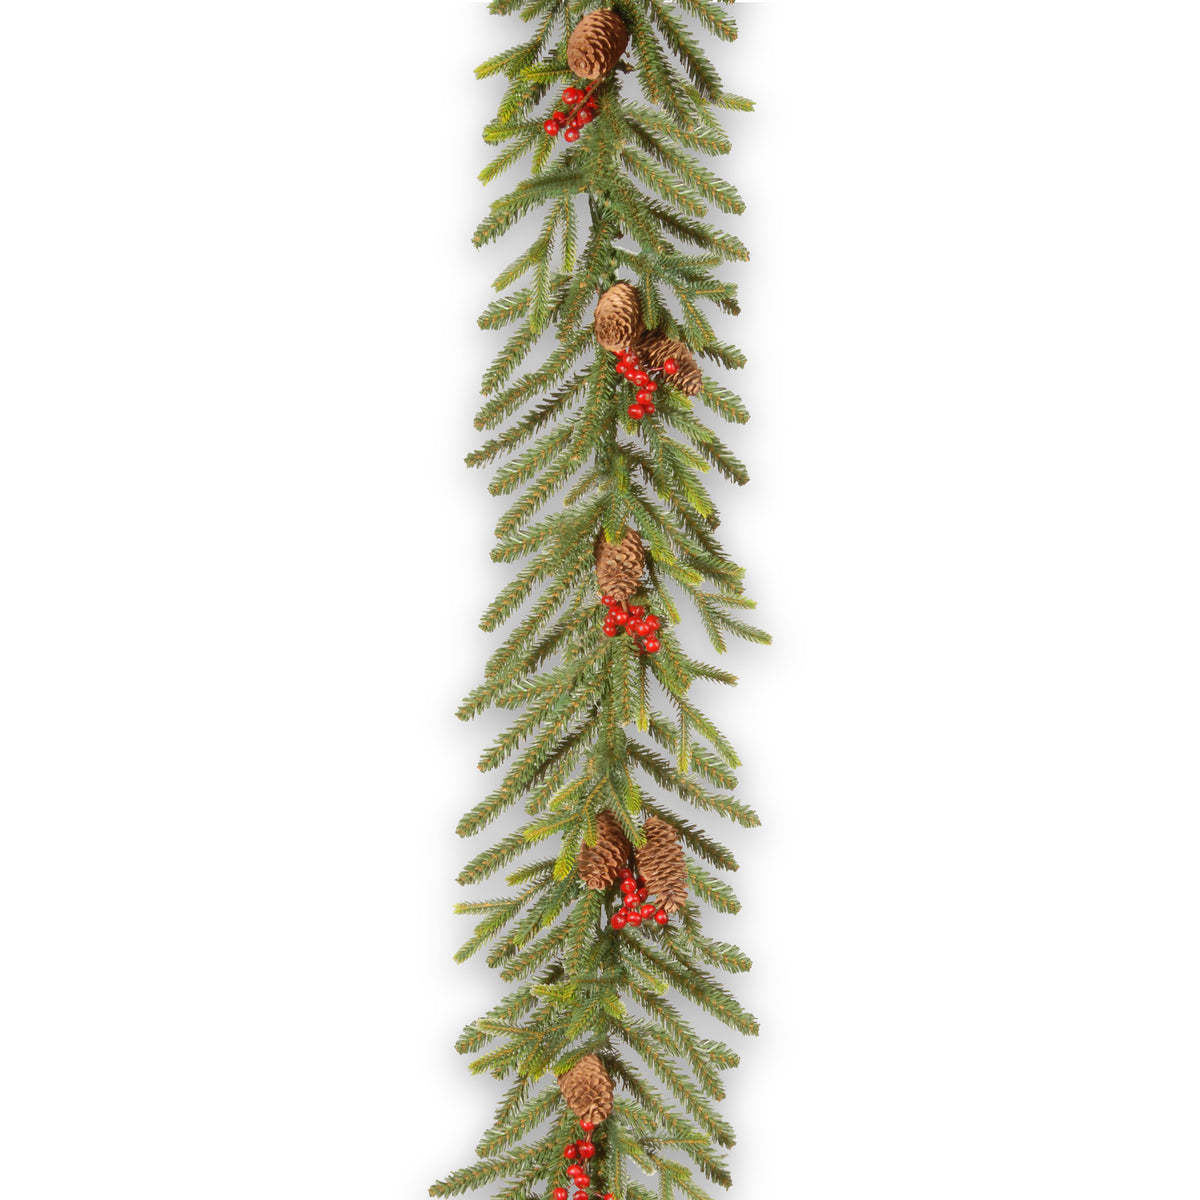 Dorcester Fir 9ft Garland with Cones & Berries from Roseland 